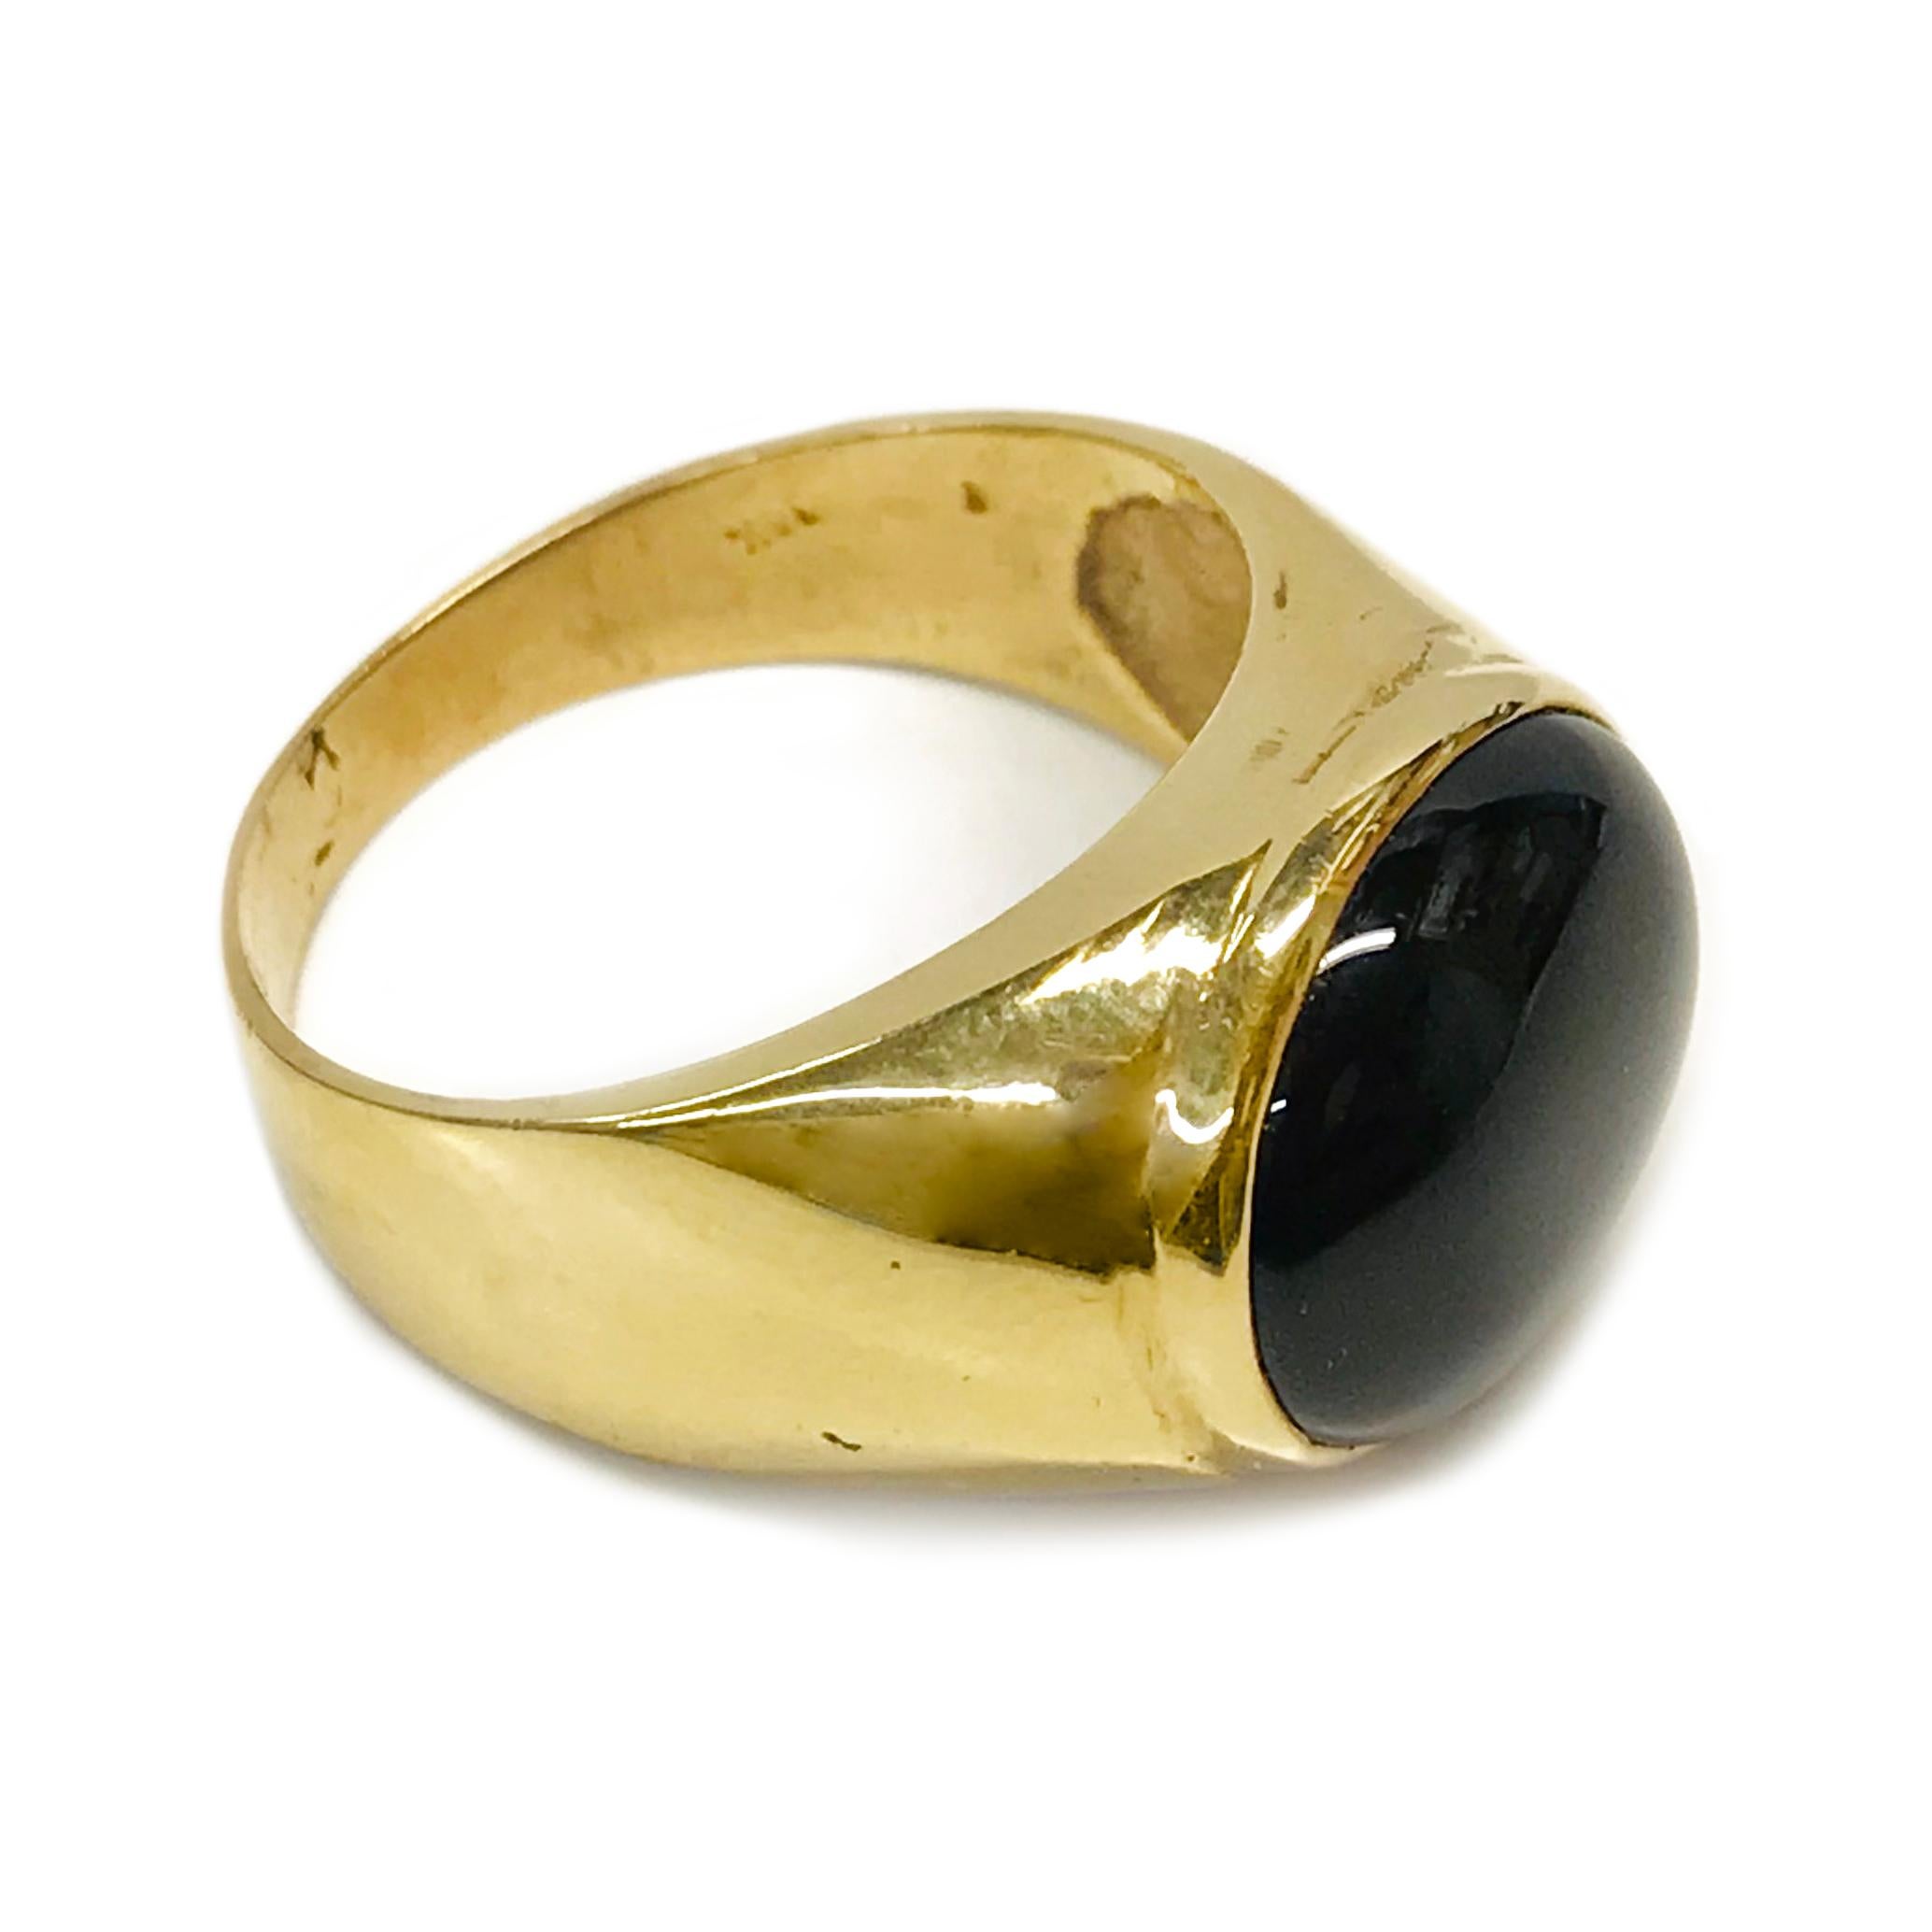 14 Karat Black Onyx Cabochon Ring. The ring features a bezel-set oval black onyx. The onyx stone measures 13mm x 11mm and the ring size is 8 3/4. The ring has a smooth shiny finish on the tapered band. Stamped on the inside of the band is 14K. The